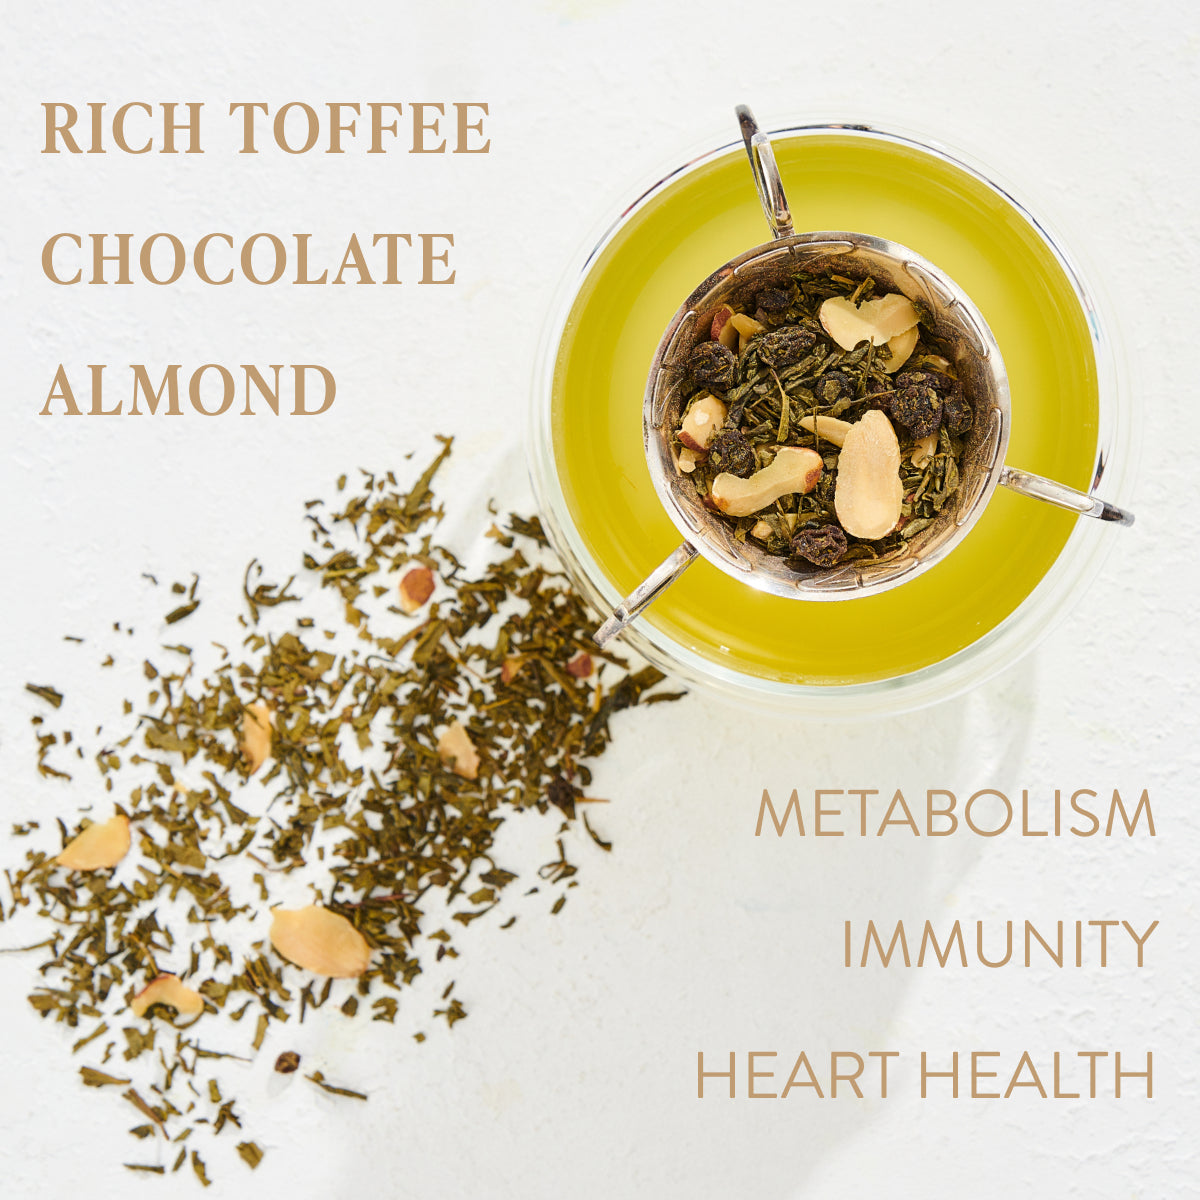 A cup of yellow-green tea on a white surface with loose leaf tea and almond pieces scattered around. Text on the image reads: "Almond Matcha Green Tea for Joy" and "Metabolism, Immunity, Heart Health". Enjoy the benefits of Magic Hour organic tea.